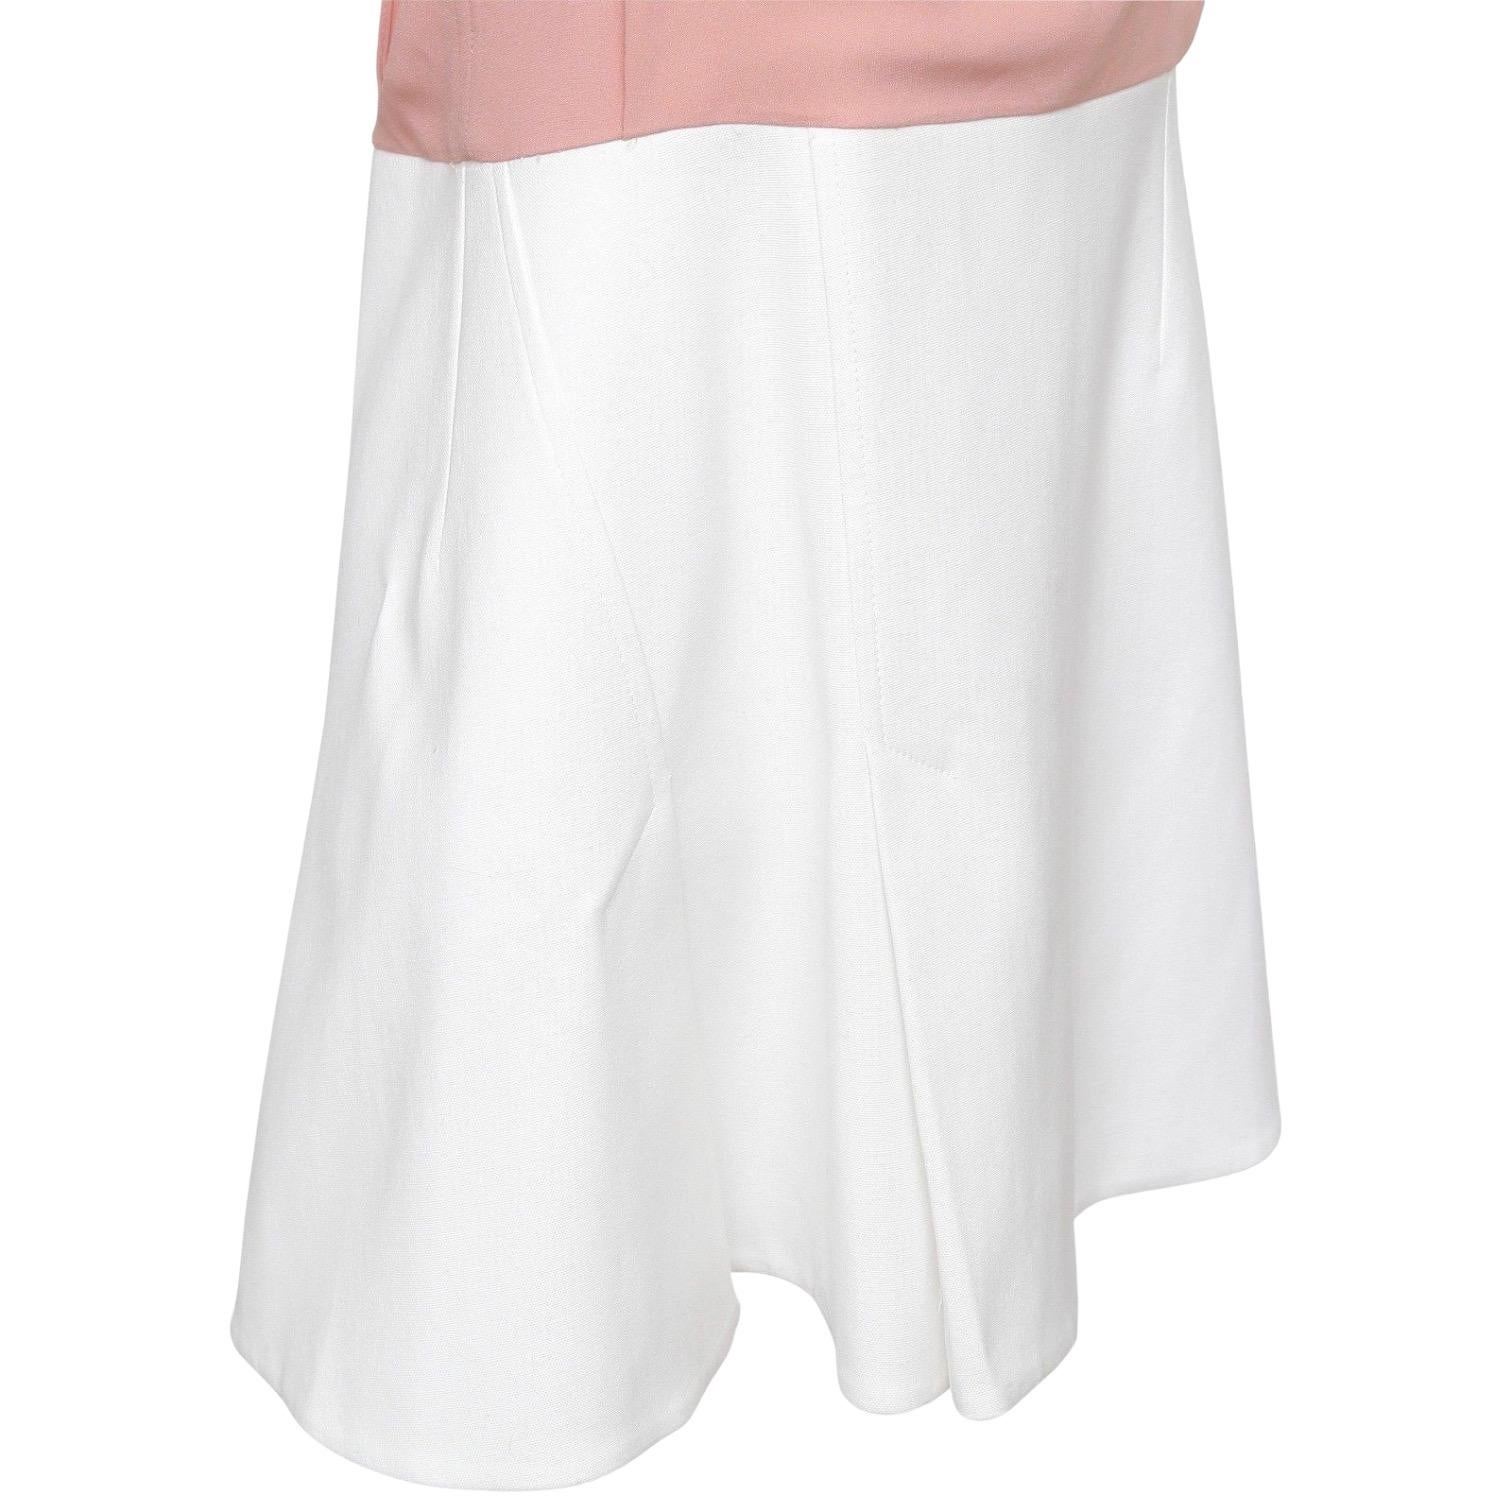 Women's ROLAND MOURET Sleeveless Dress Cowl Neck 2016 PAGET White Pink 14 BNWT $1230 For Sale